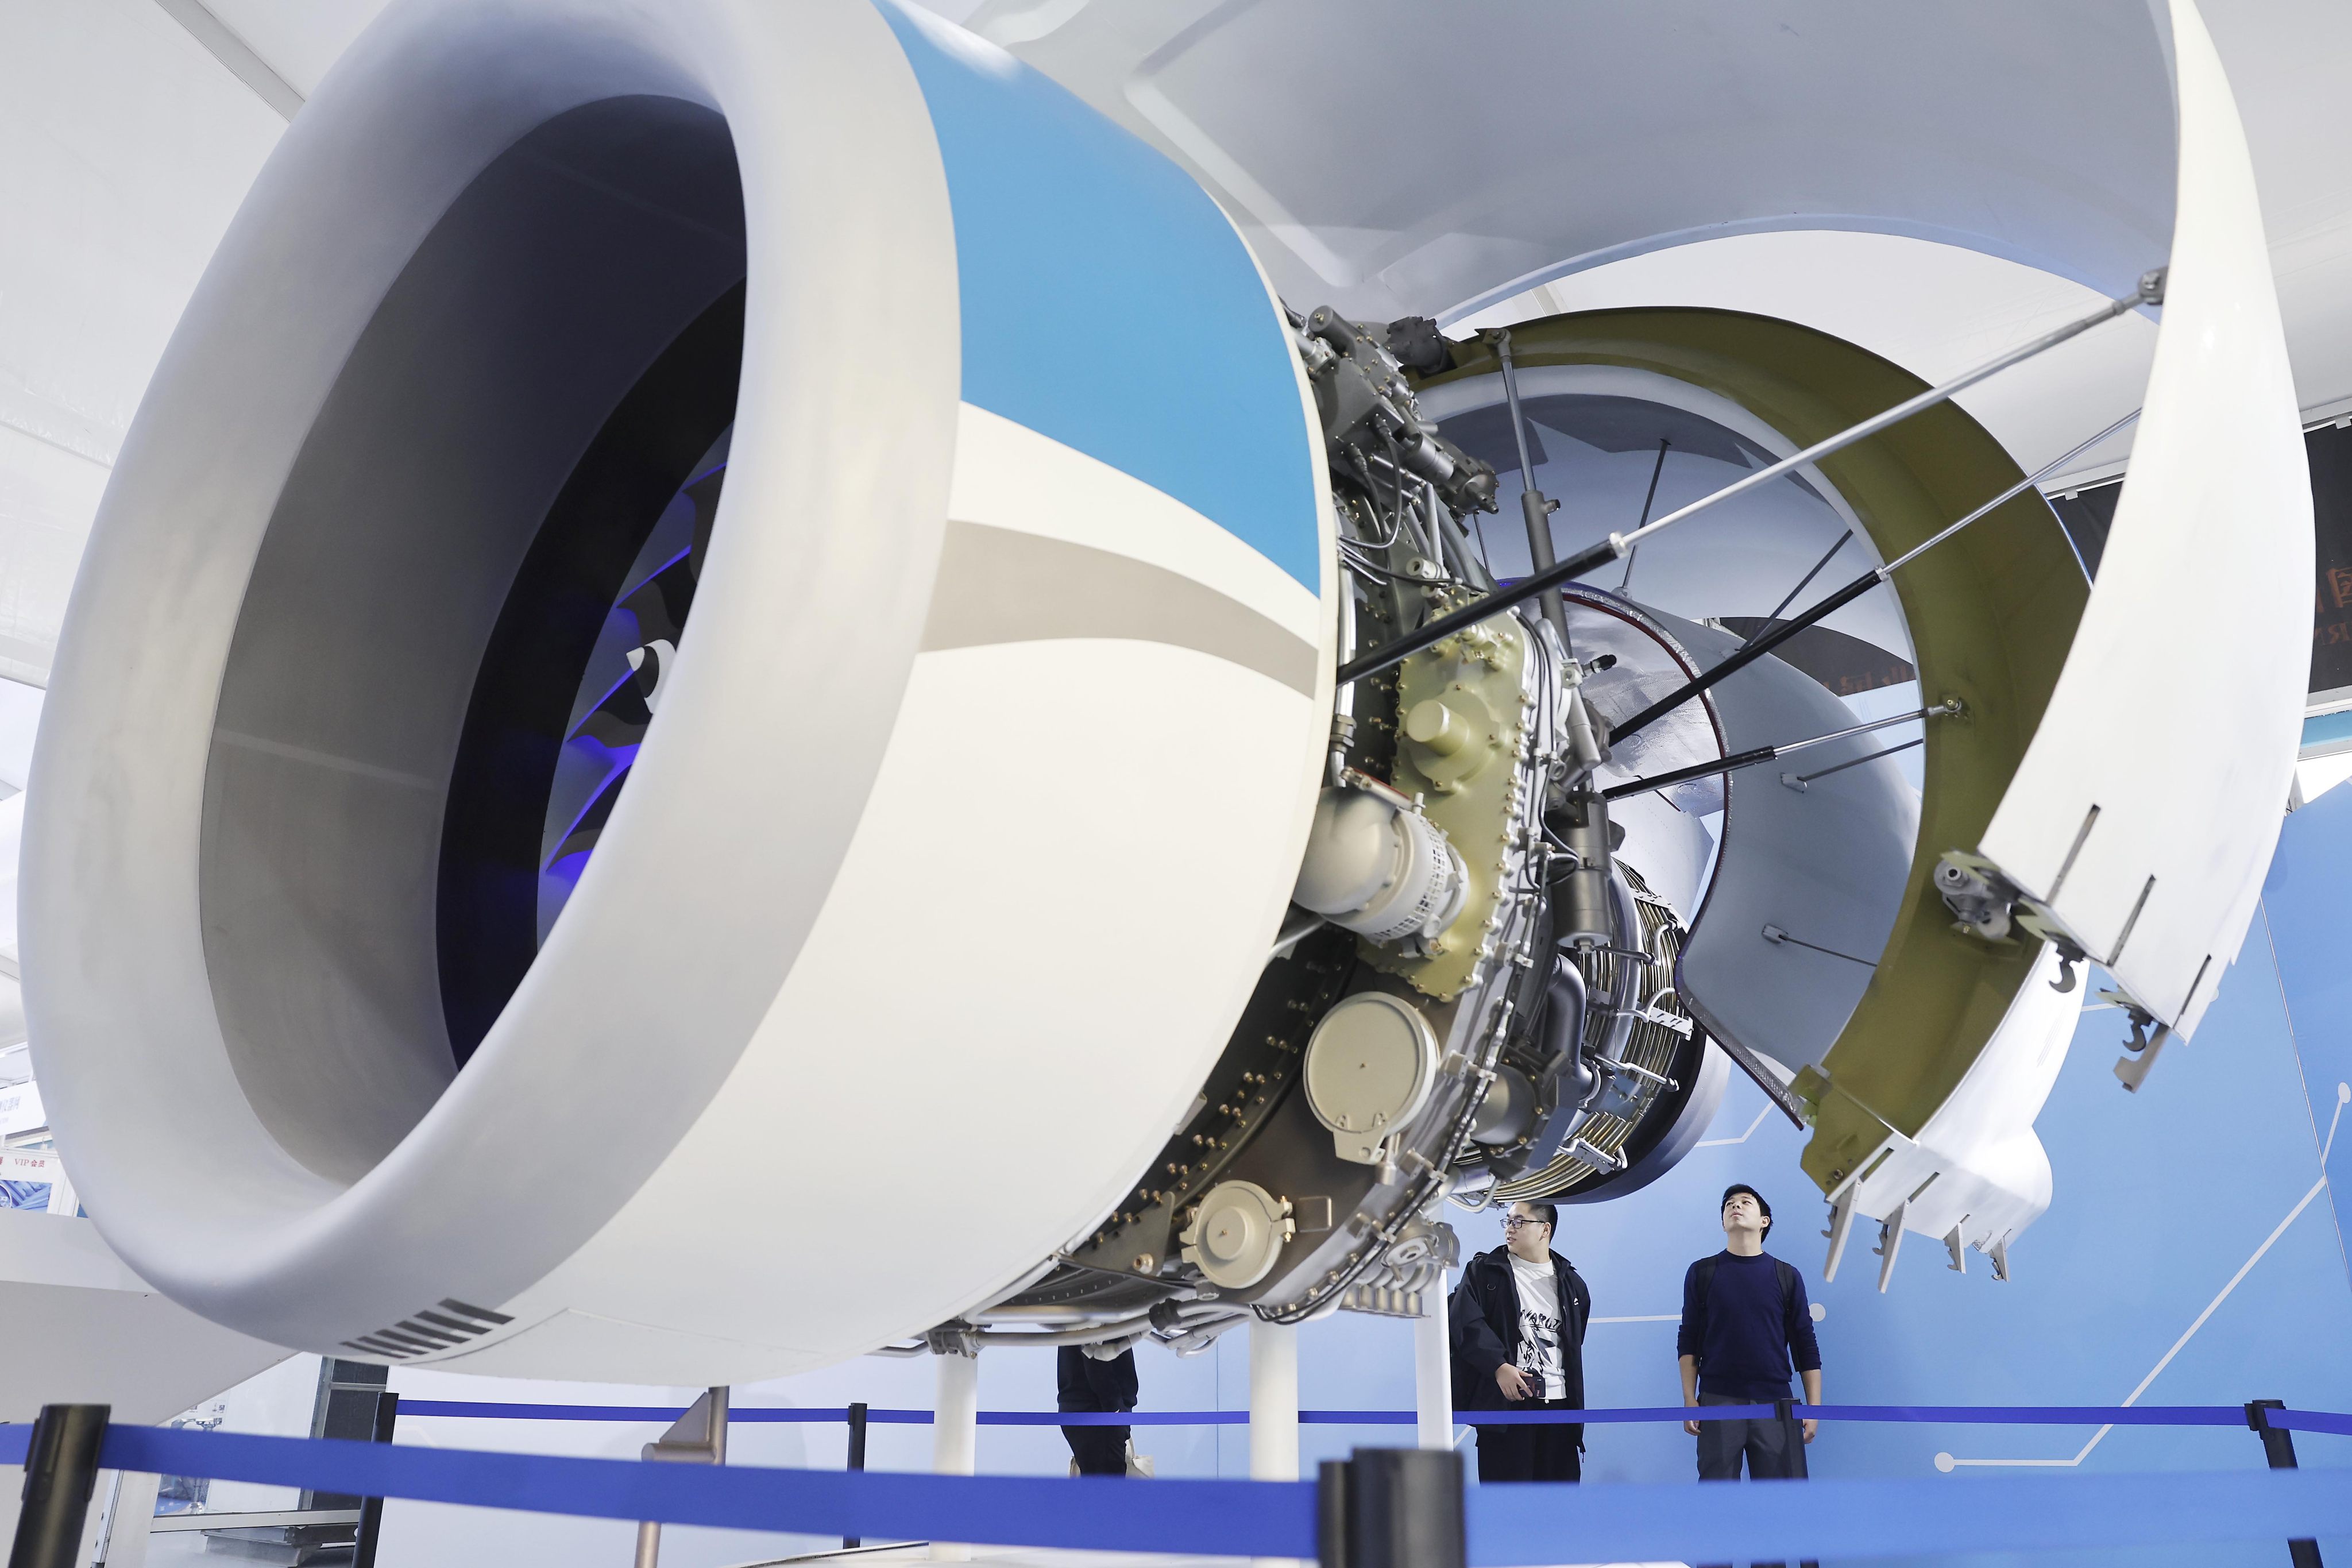 The CJ-1000 is a high-bypass turbofan jet engine being developed by the Aero Engine Corporation of China (AECC) at its base in Shanghai. Photo: CNS